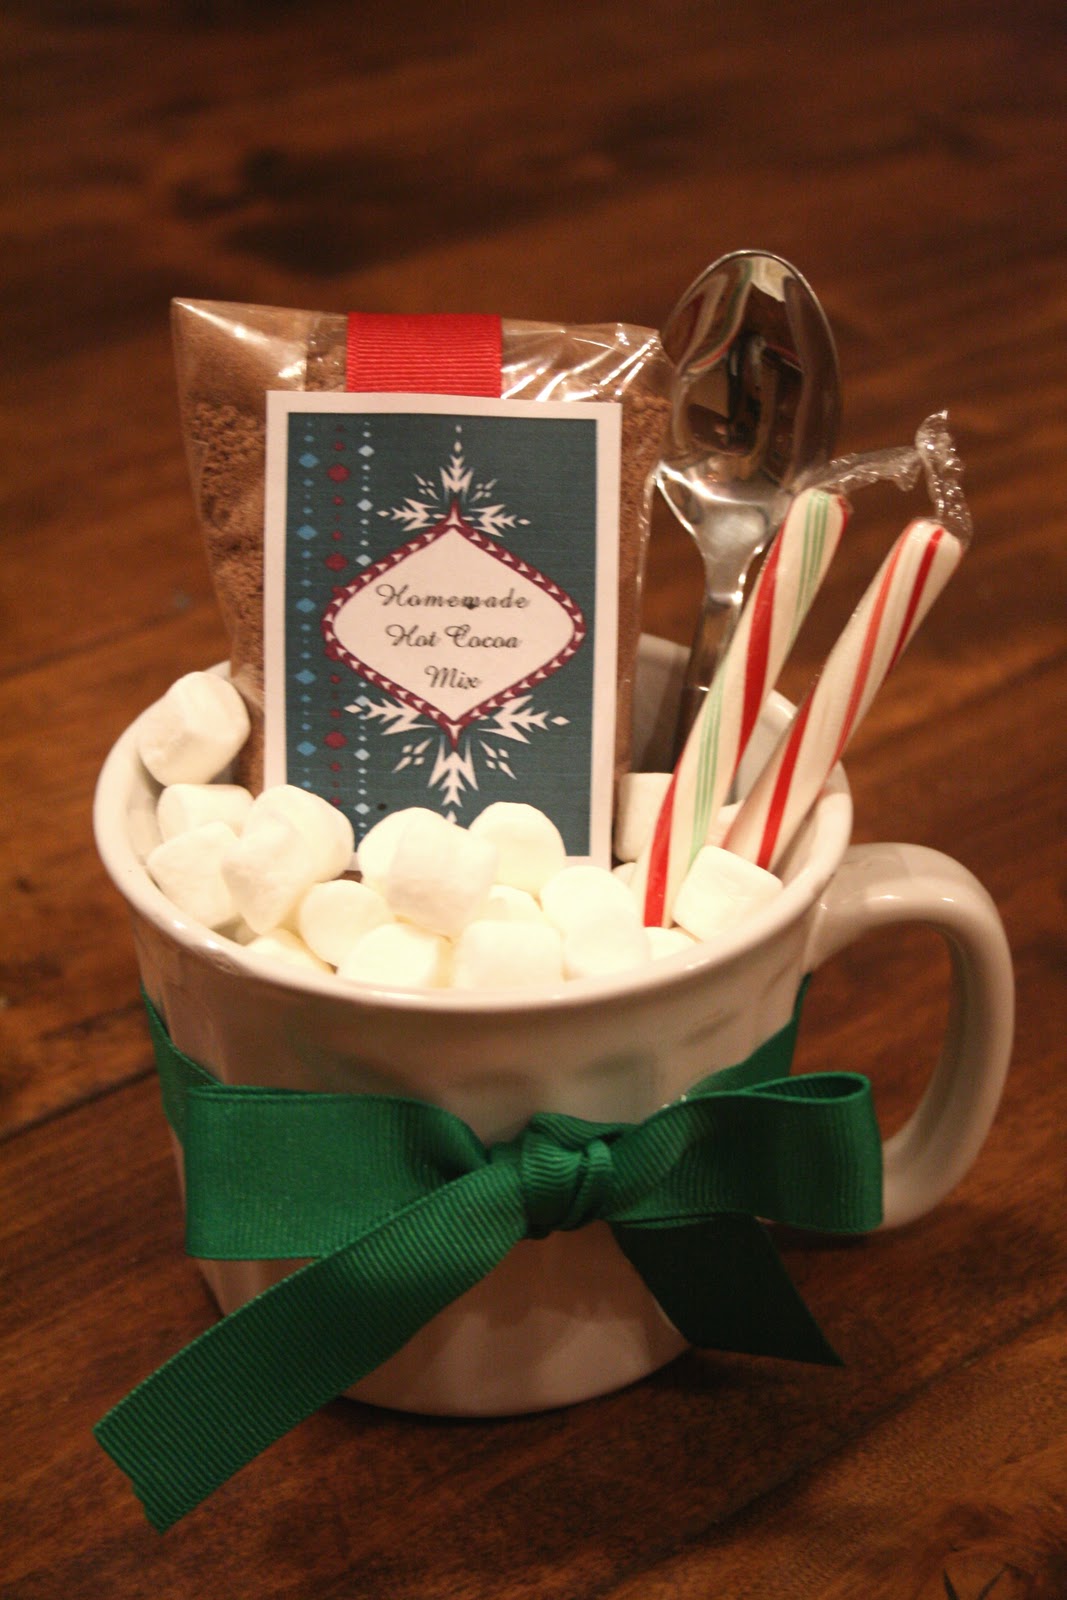 The Nesting Corral Homemade Christmas Gifts Hot Cocoa